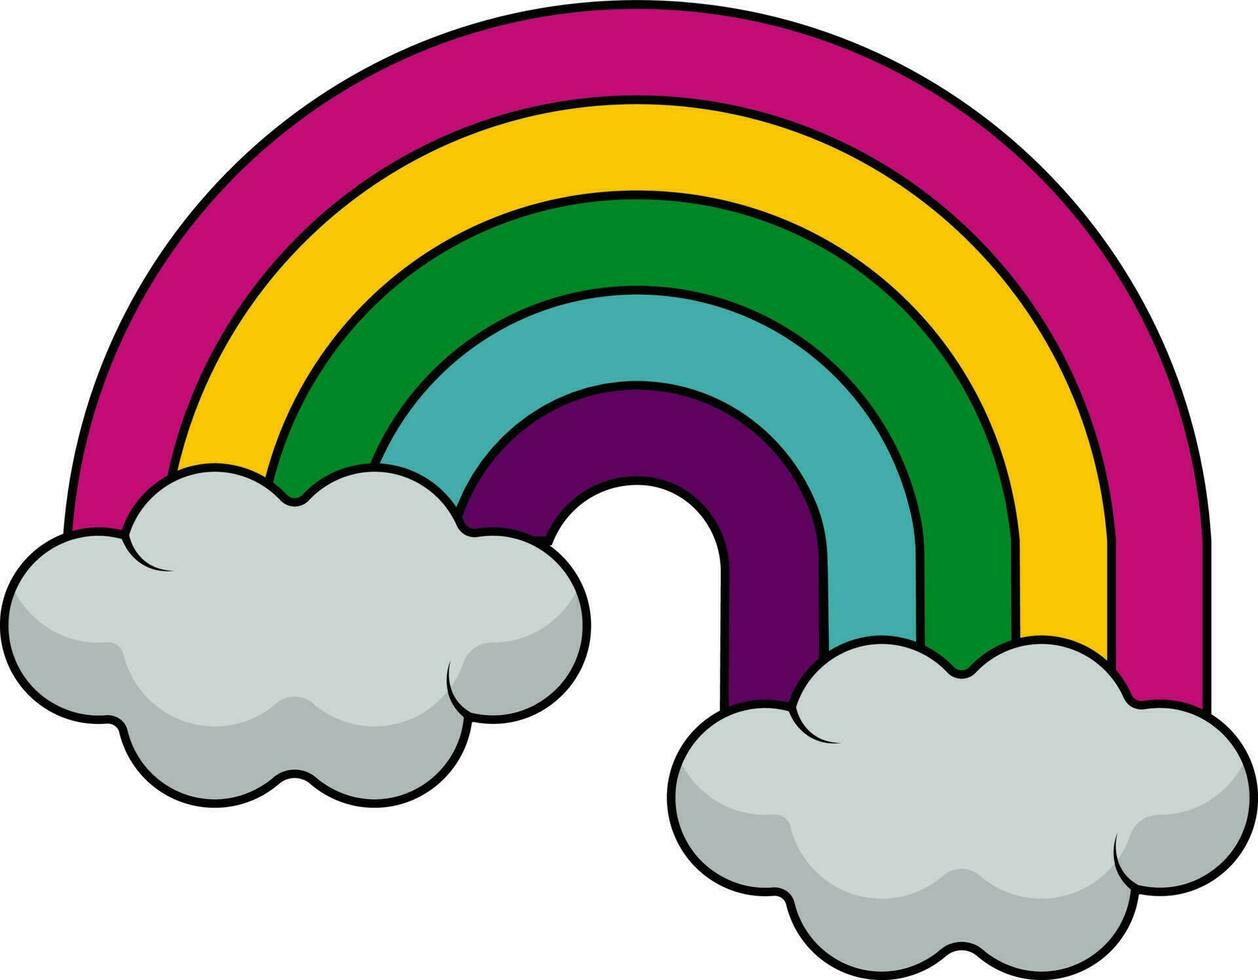 Flat Style Rainbow Cloud Colorful Icon. vector